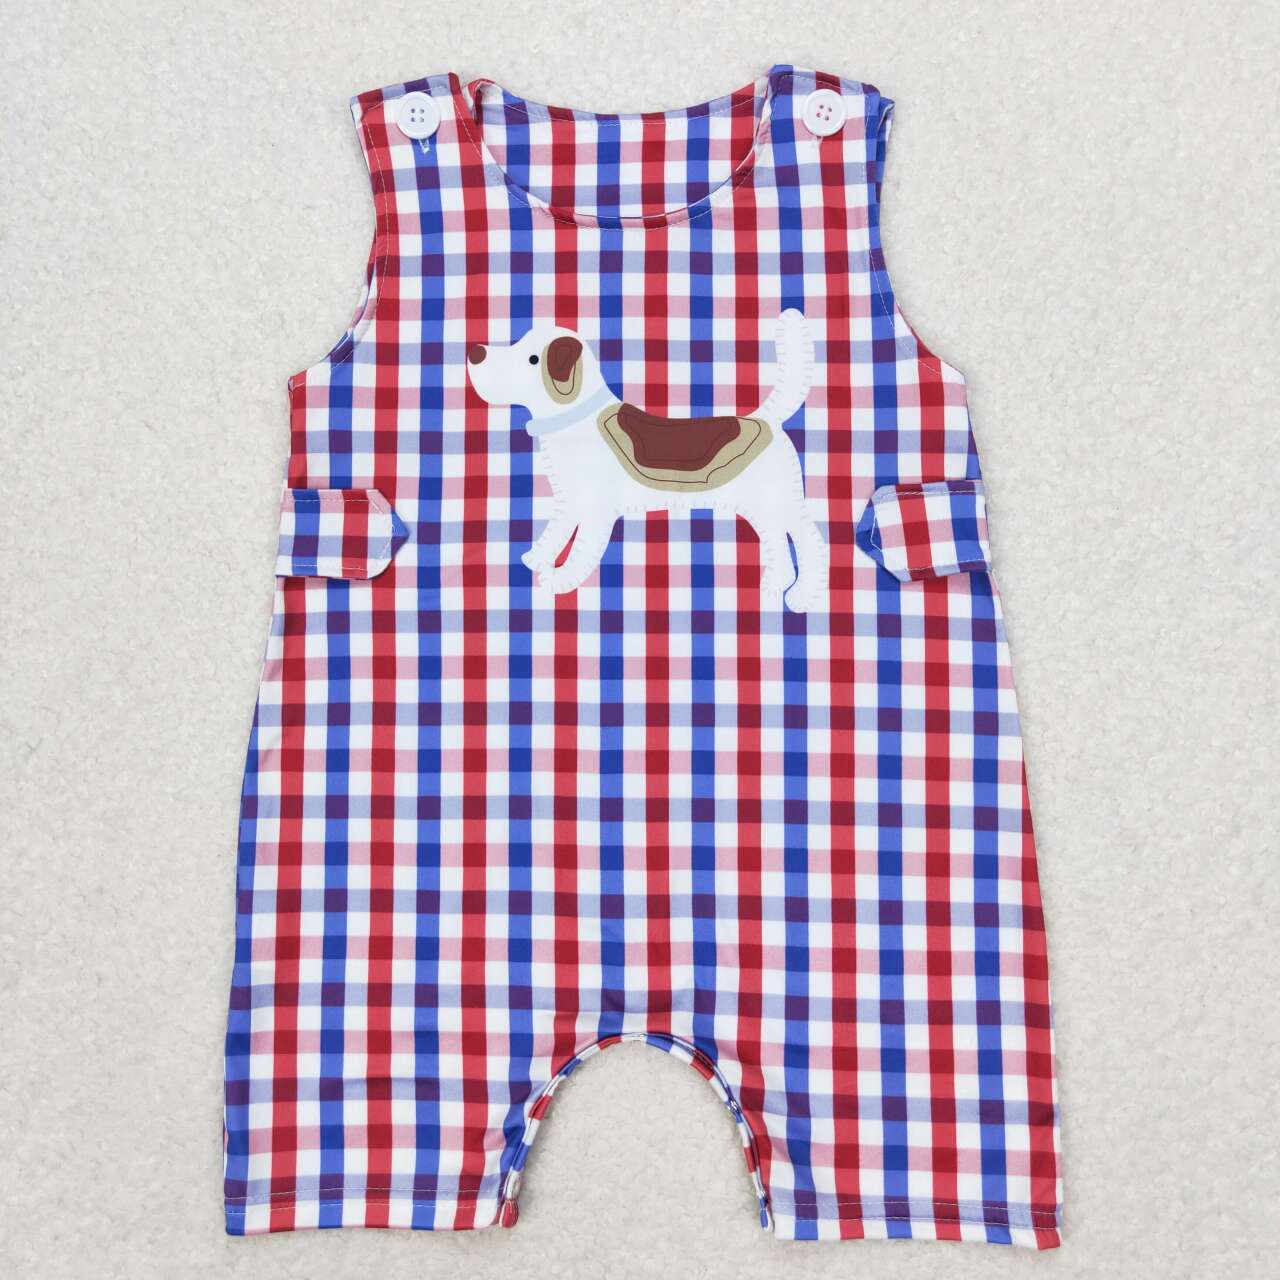 SR0821 Puppy Red and Blue Plaid Sleeveless Bodysuit